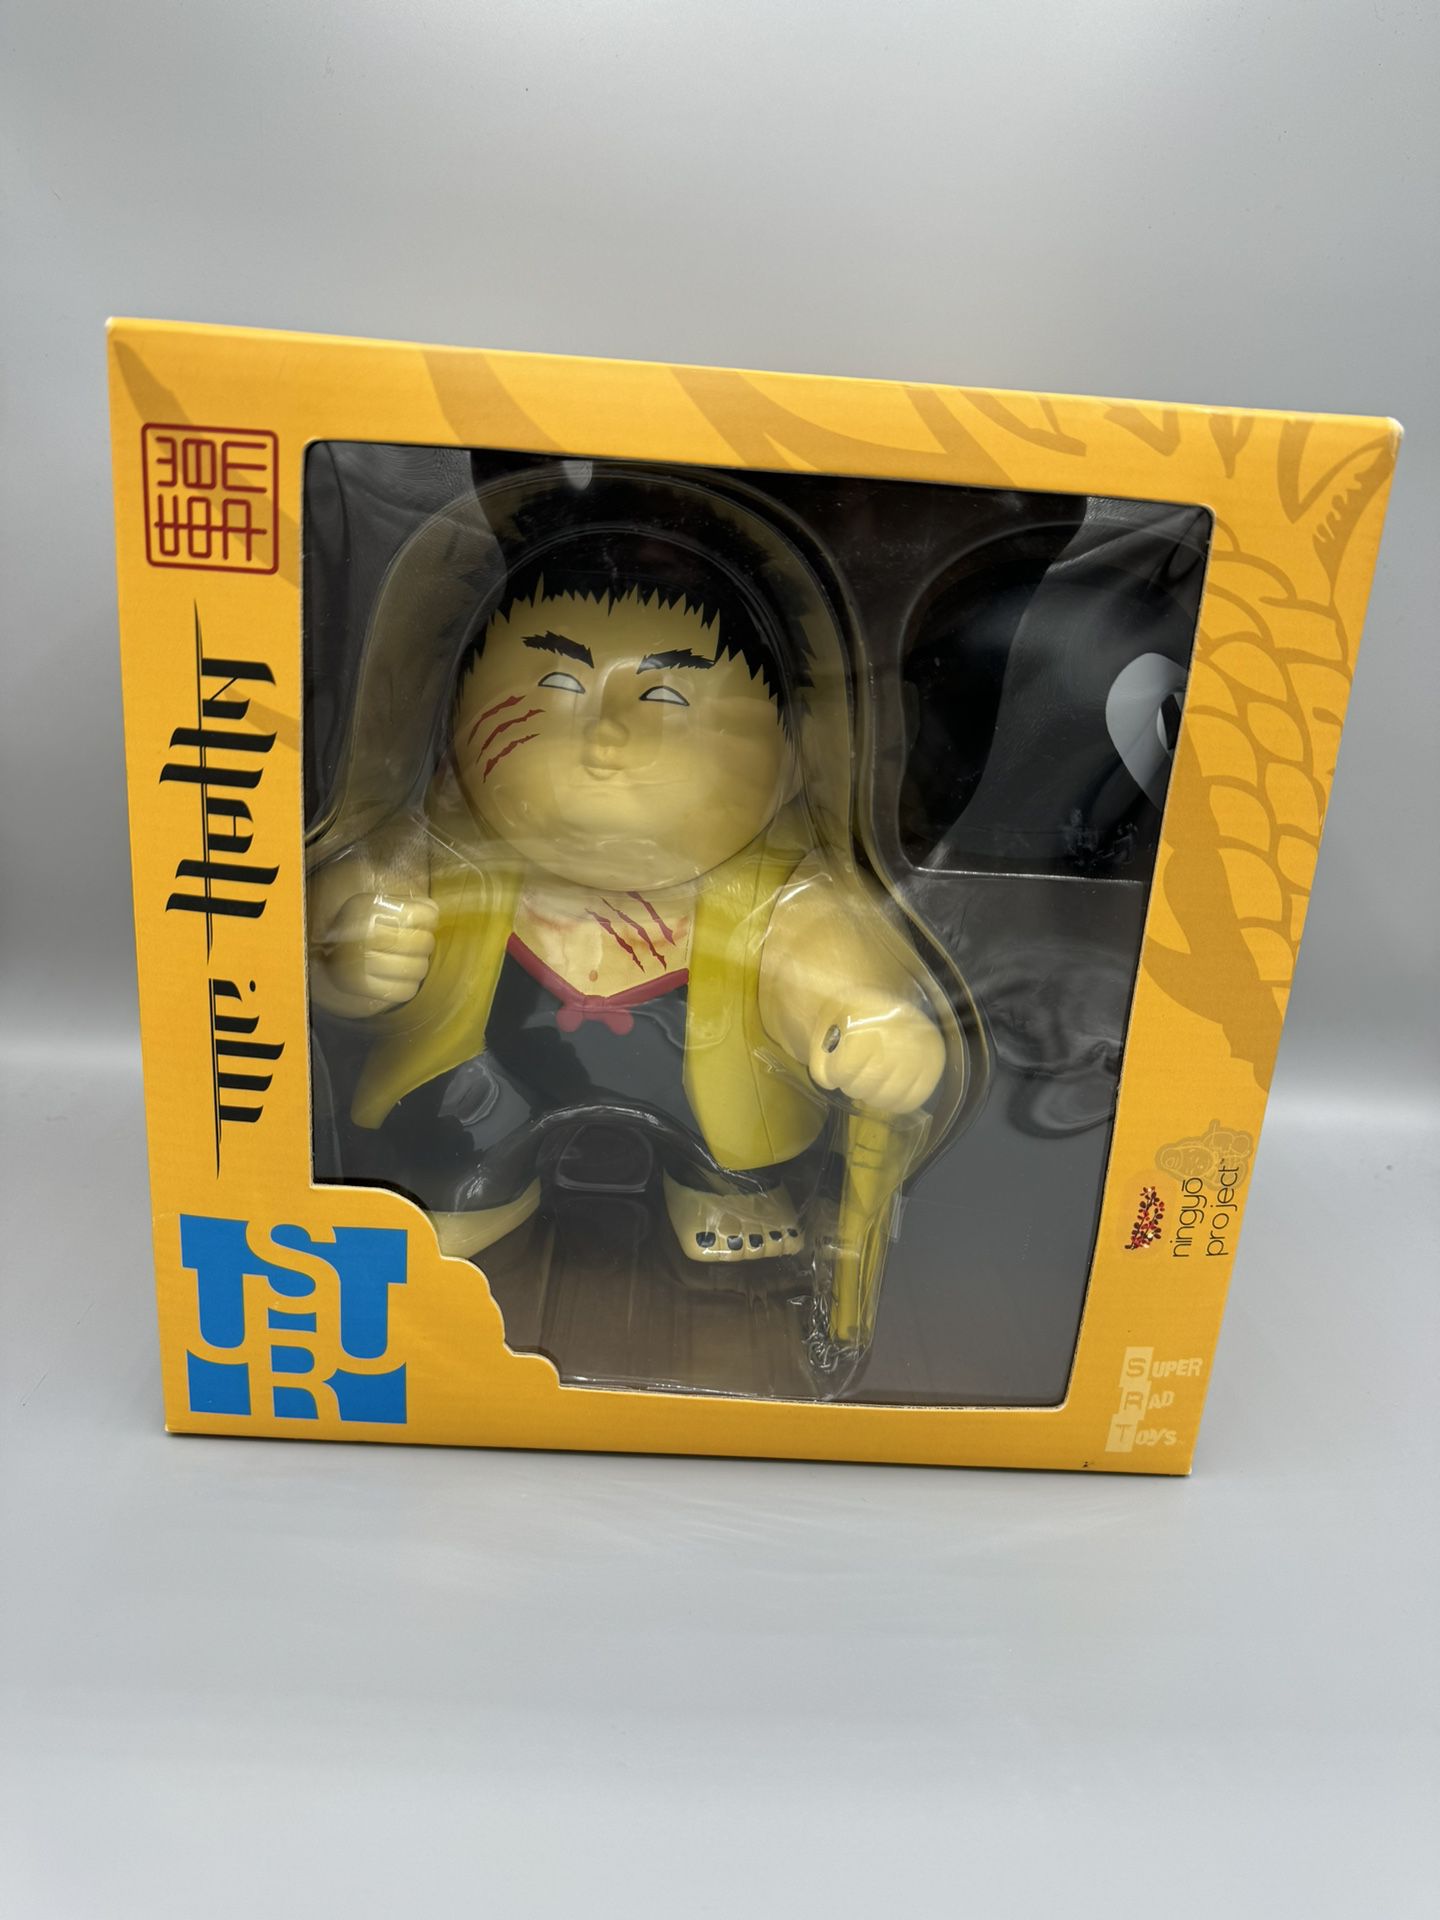 The Mr. Hahn Ningyo vinyl figure designed by Joe Hahn of Linkin Park and produced by Super Rad Toys.